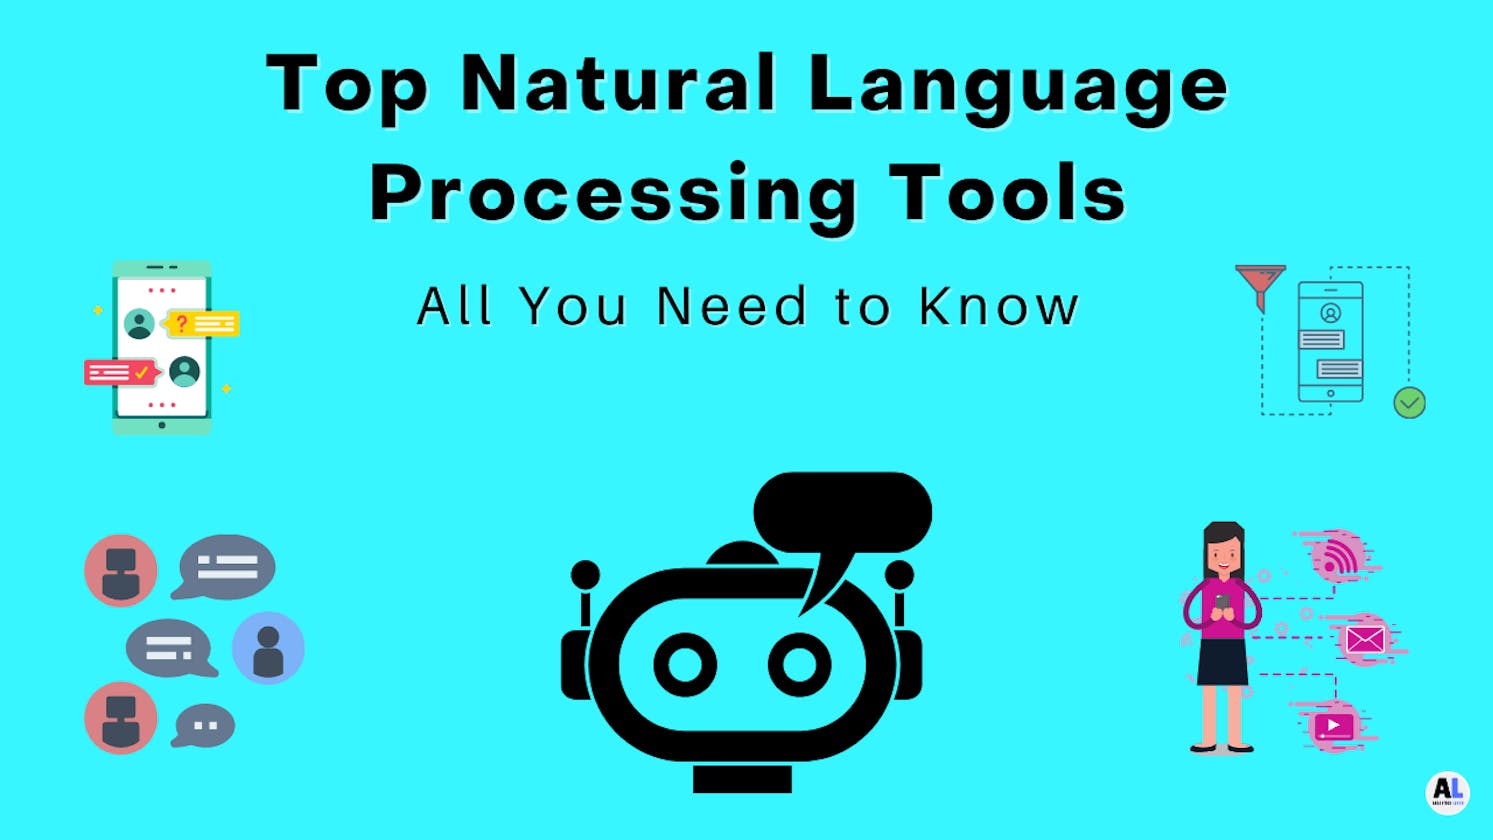 NLP Tools and Libraries - An overview of popular NLP tools and libraries, including NLTK, spaCy, and TensorFlow.